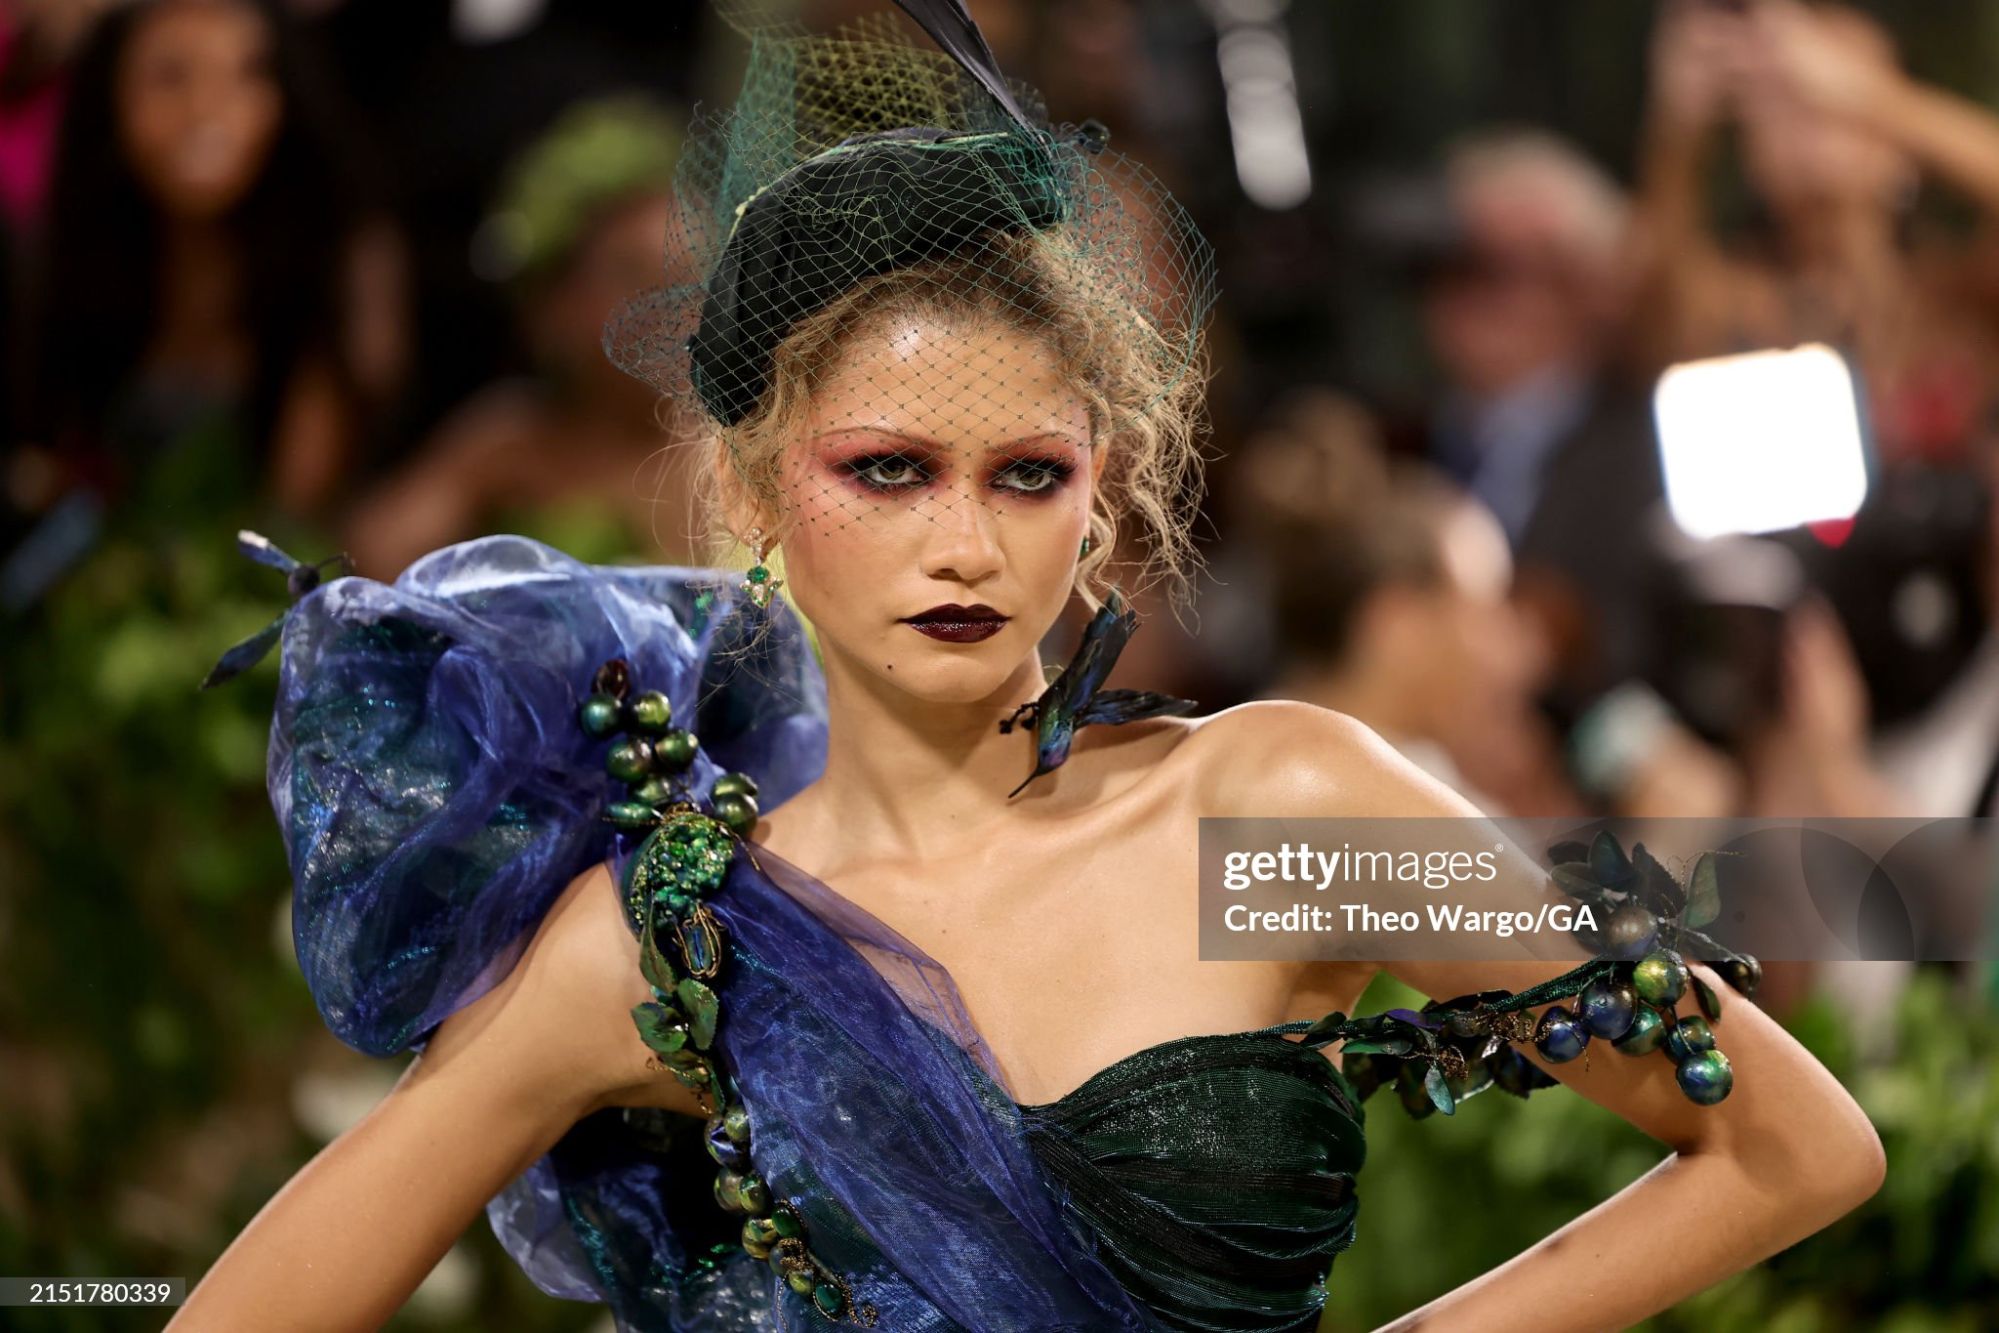 gettyimages-2151780339-2048x2048.jpg